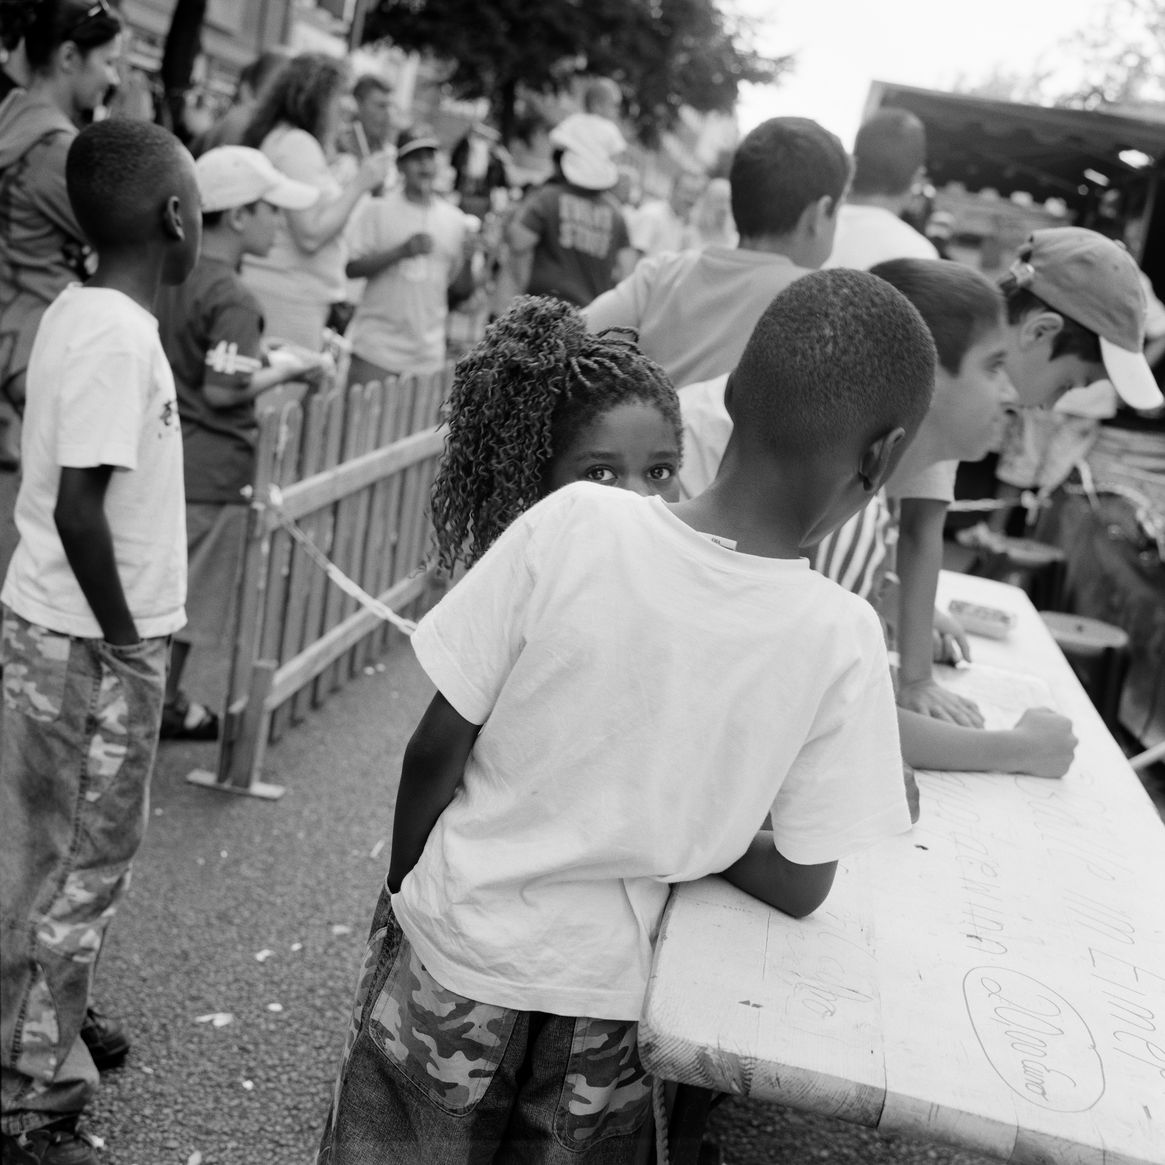 Black and white photograph: view of an outdoor party. Two children are standing next to a long table, one person is looking directly into the camera and is partially obscured by the person in front of them. 